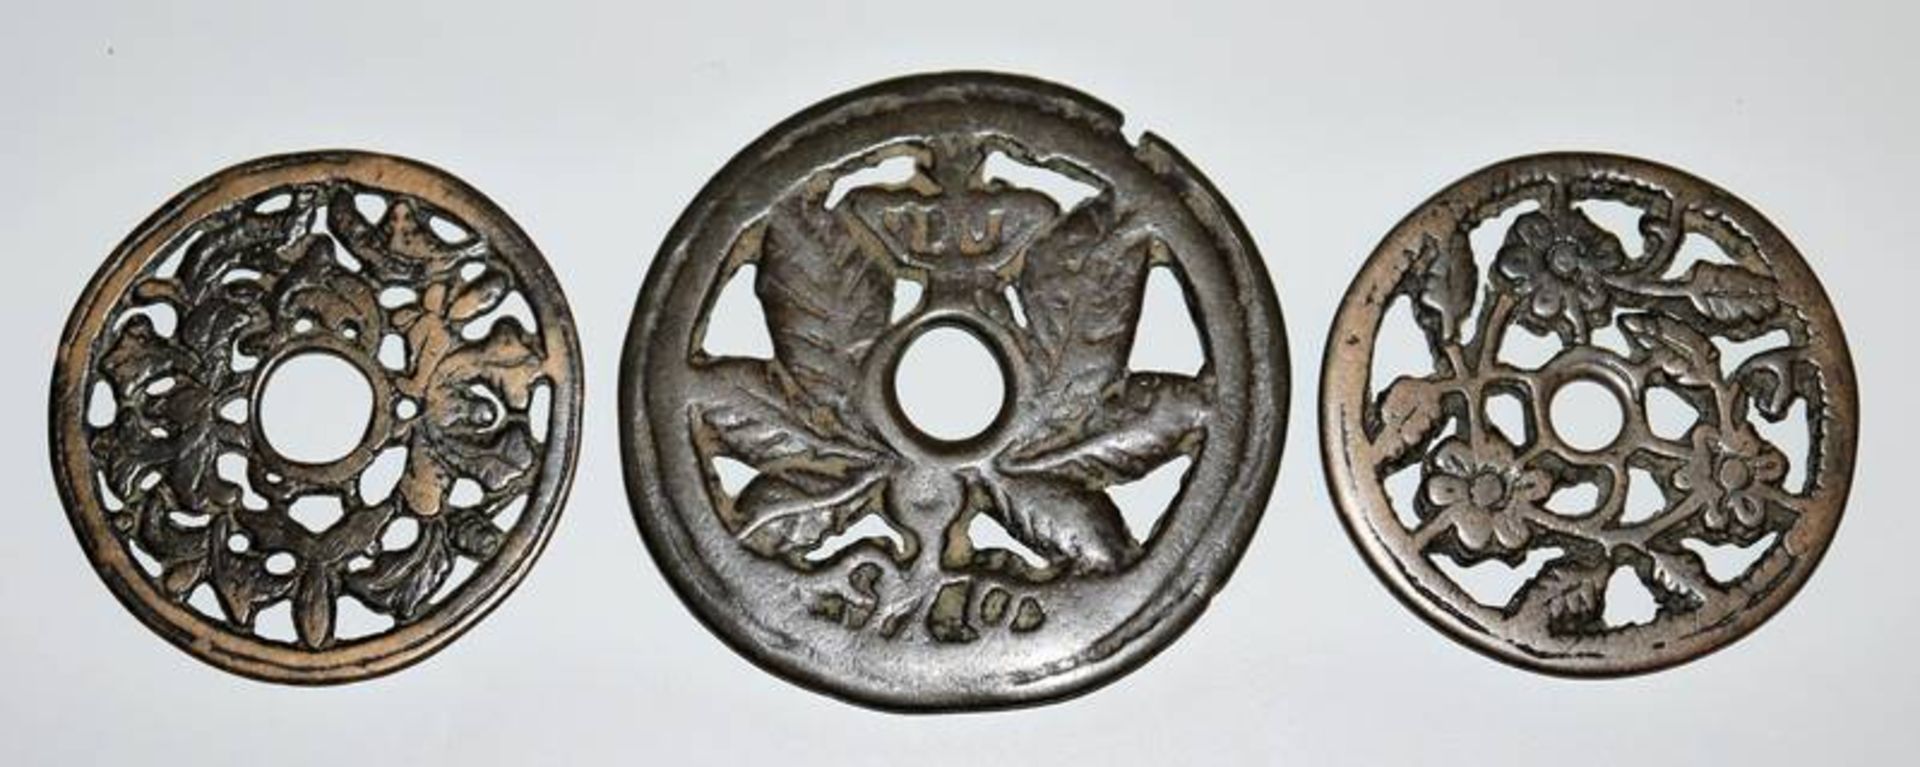 Three numismatic charms with flowers from the Chinese Ming/Qing period - Image 2 of 2